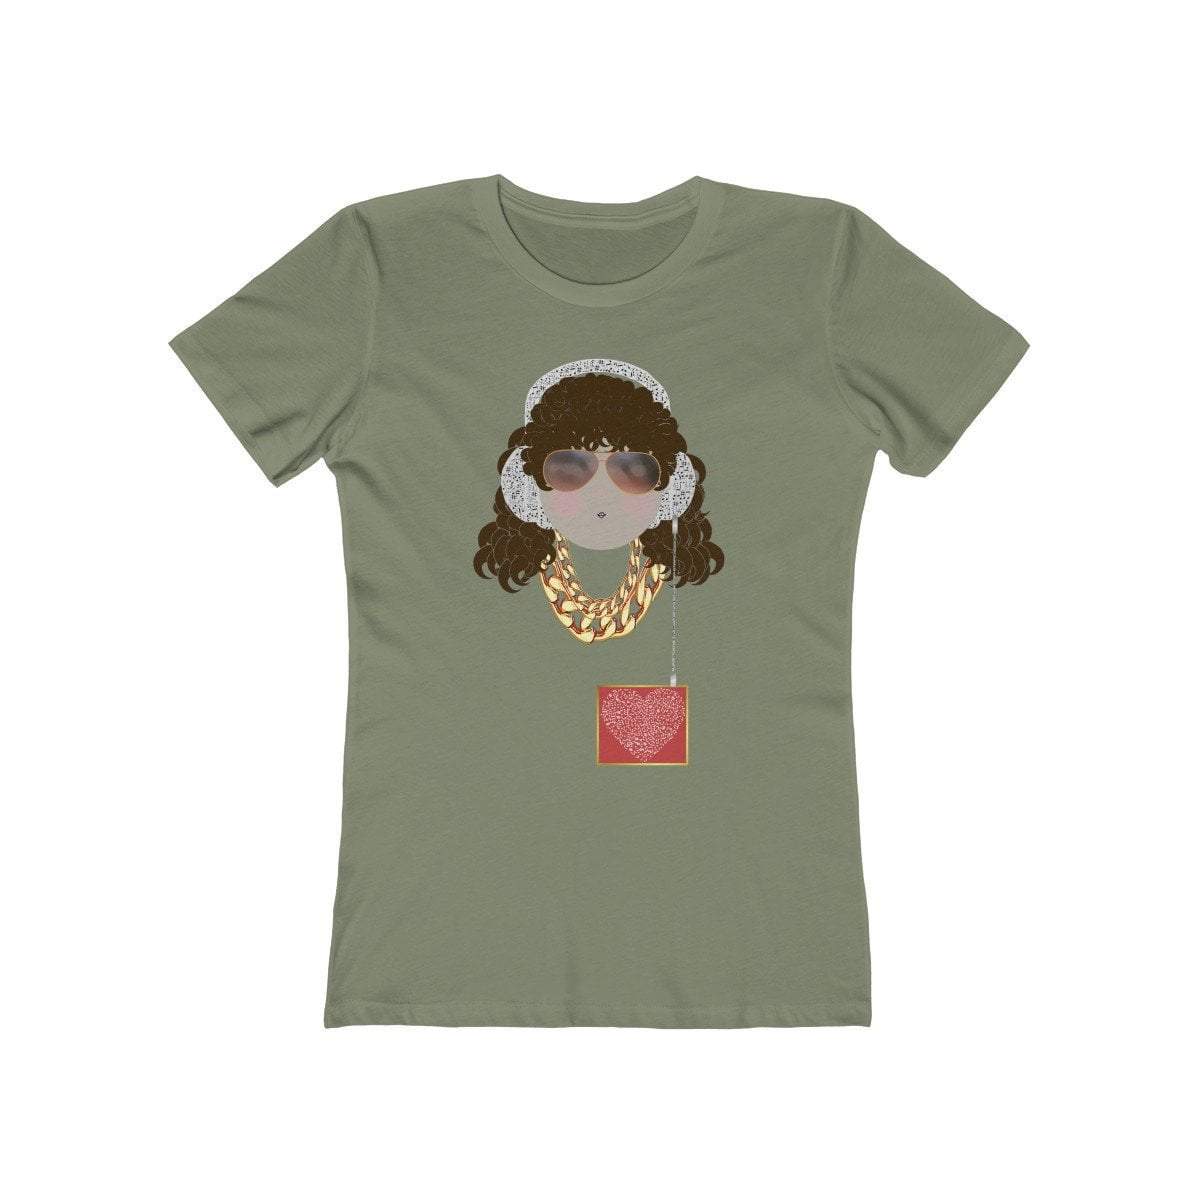 Plumskum Clothing > Women's Clothing > Tops & Tees > T-shirts S / Solid Forest Green Chele My Belle Loves Music Colorful Tee Wearing Sunglasses